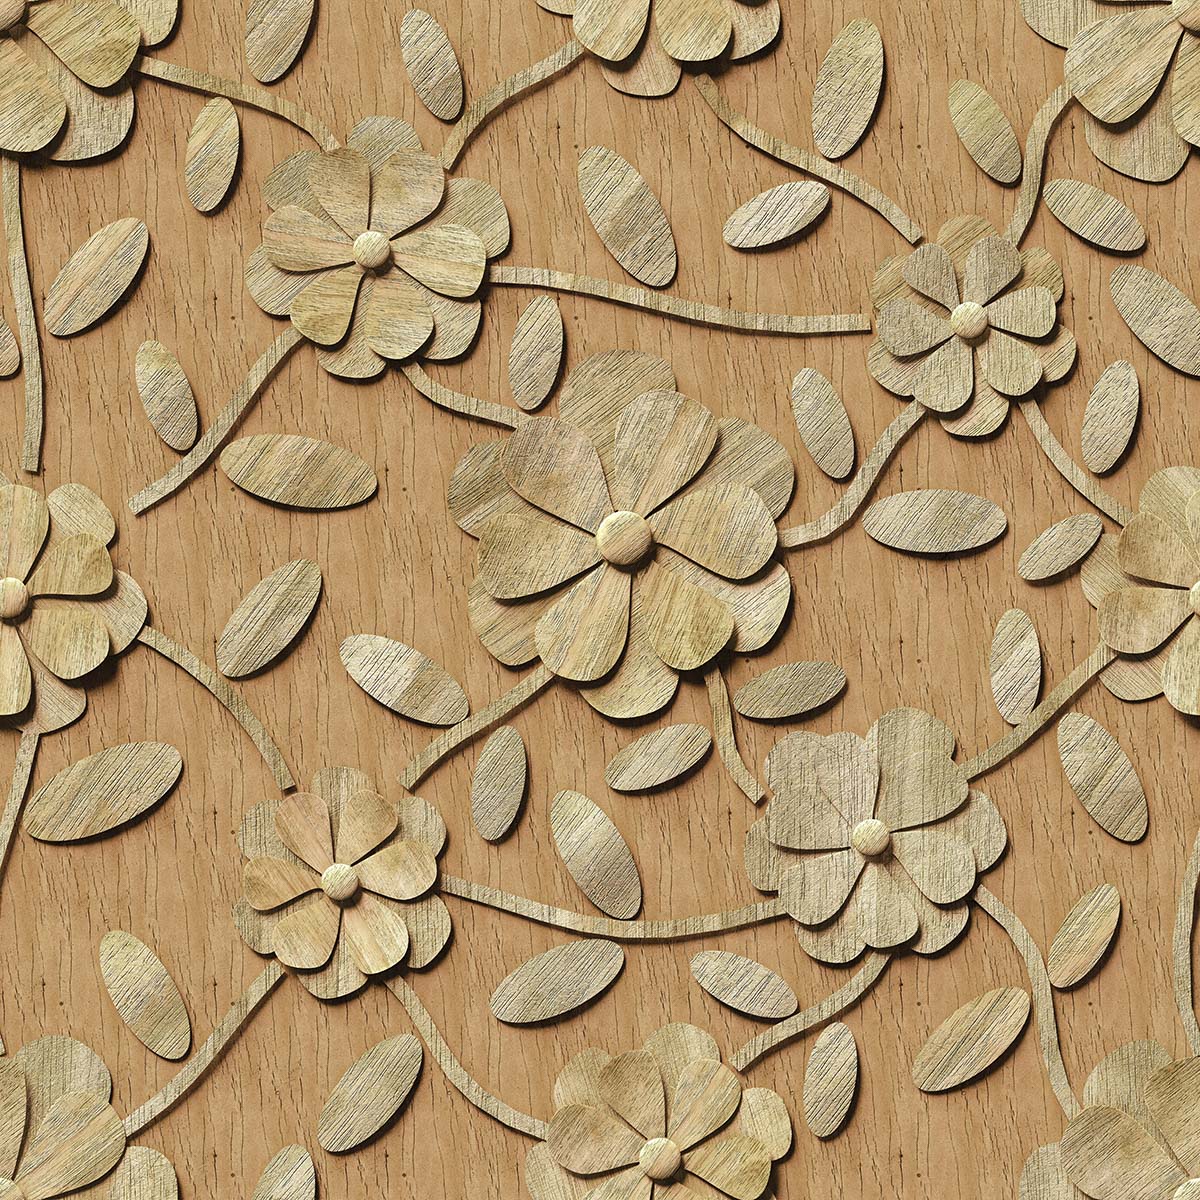 A wood carving of flowers and leaves